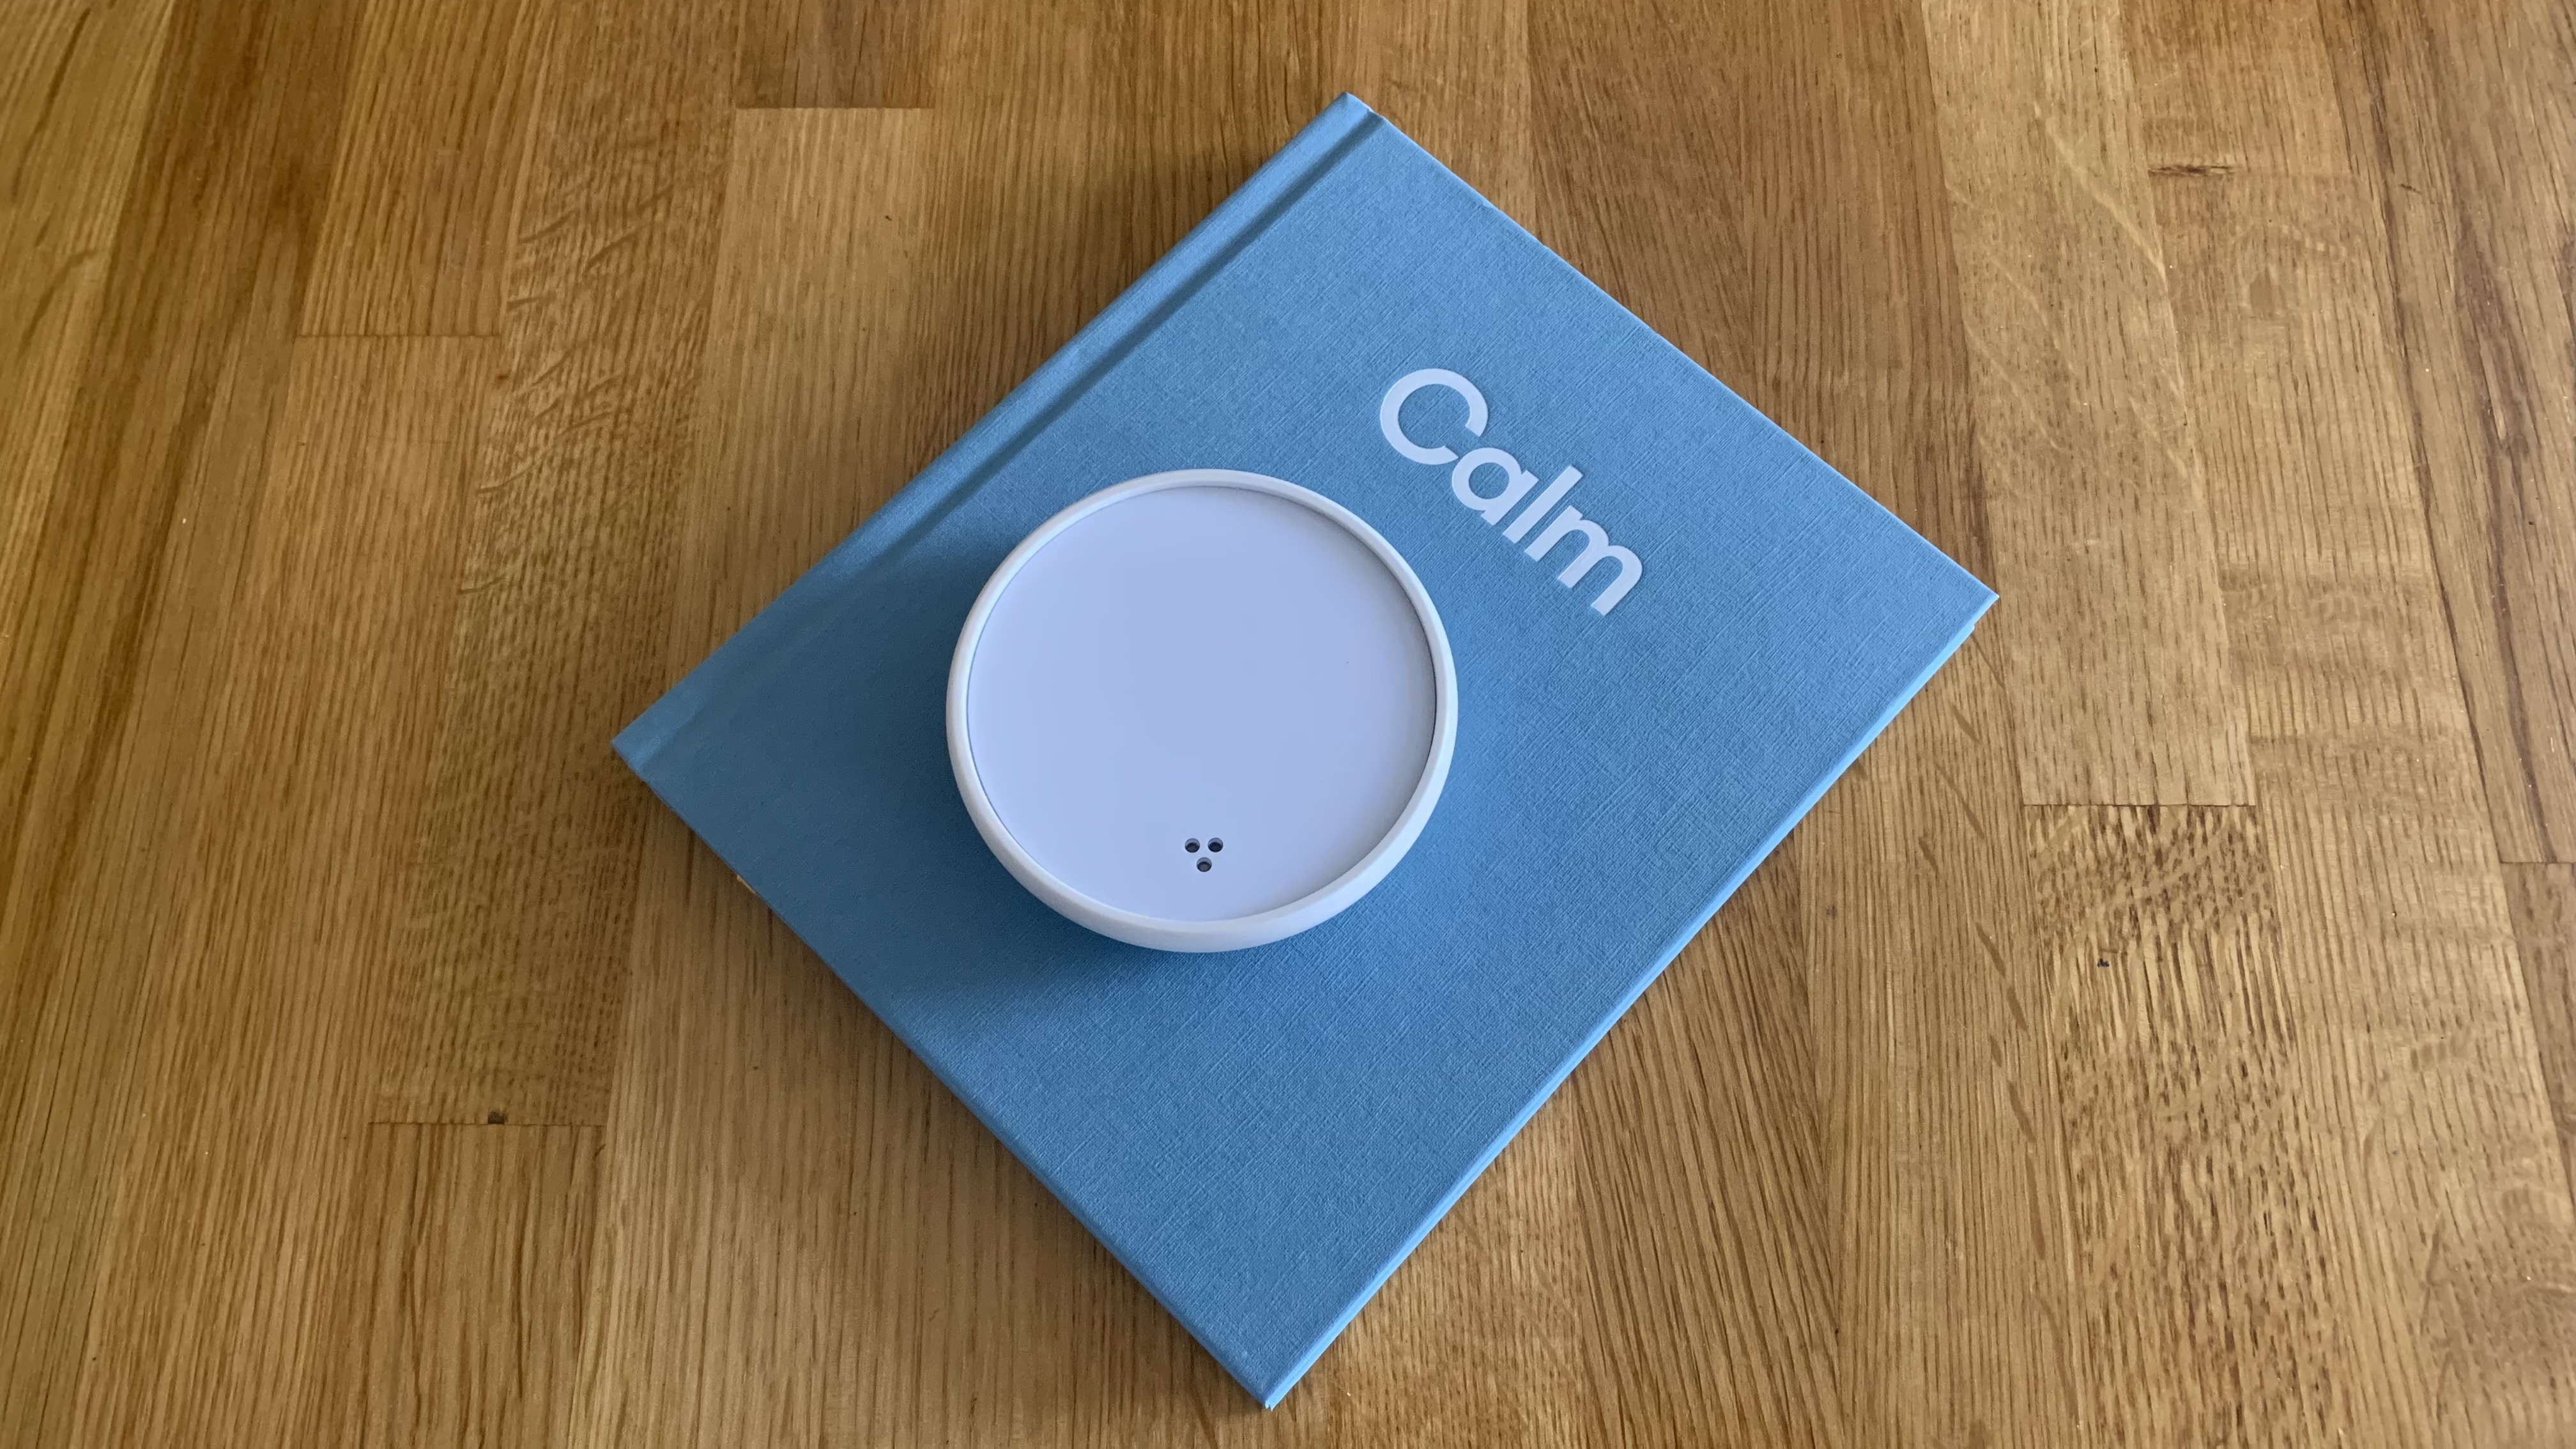 The original Dodow sleep device placed on a blue book with the word Calm at the top